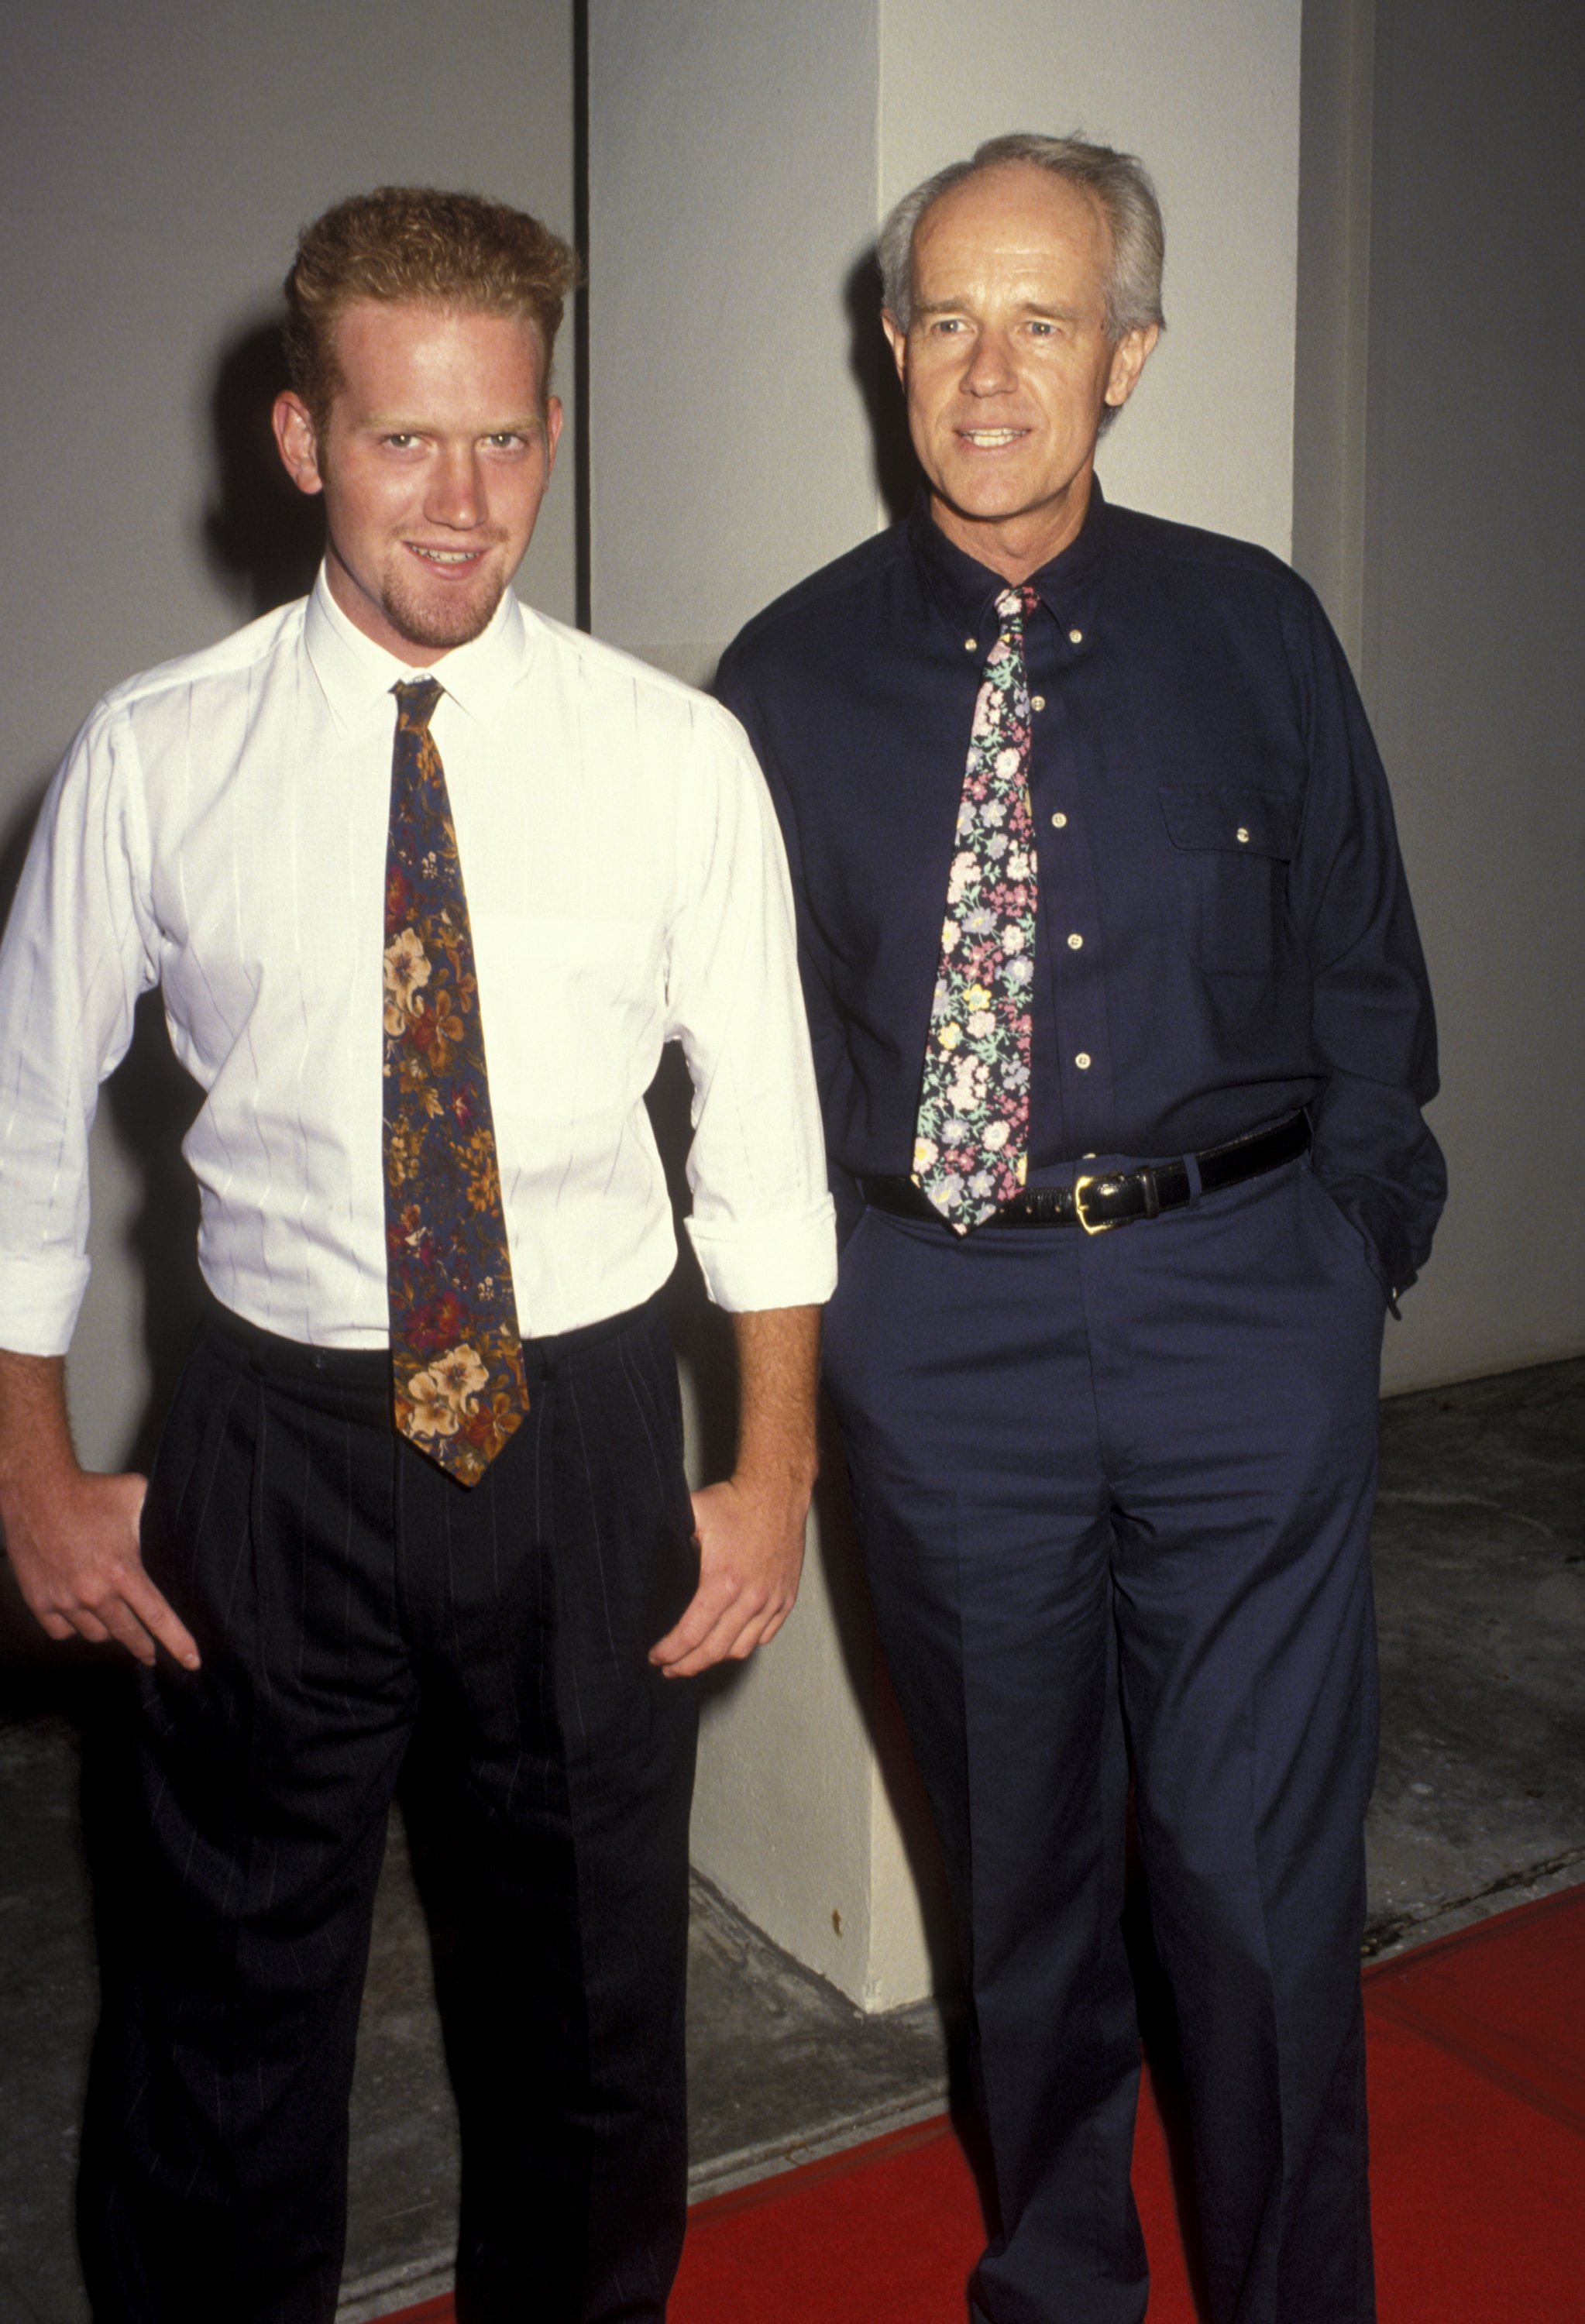 Mike Farrell and Mike Farrell, Jr. at the Benefit Premiere of "Bob Roberts" on September 1, 1992 | Source: Getty Images